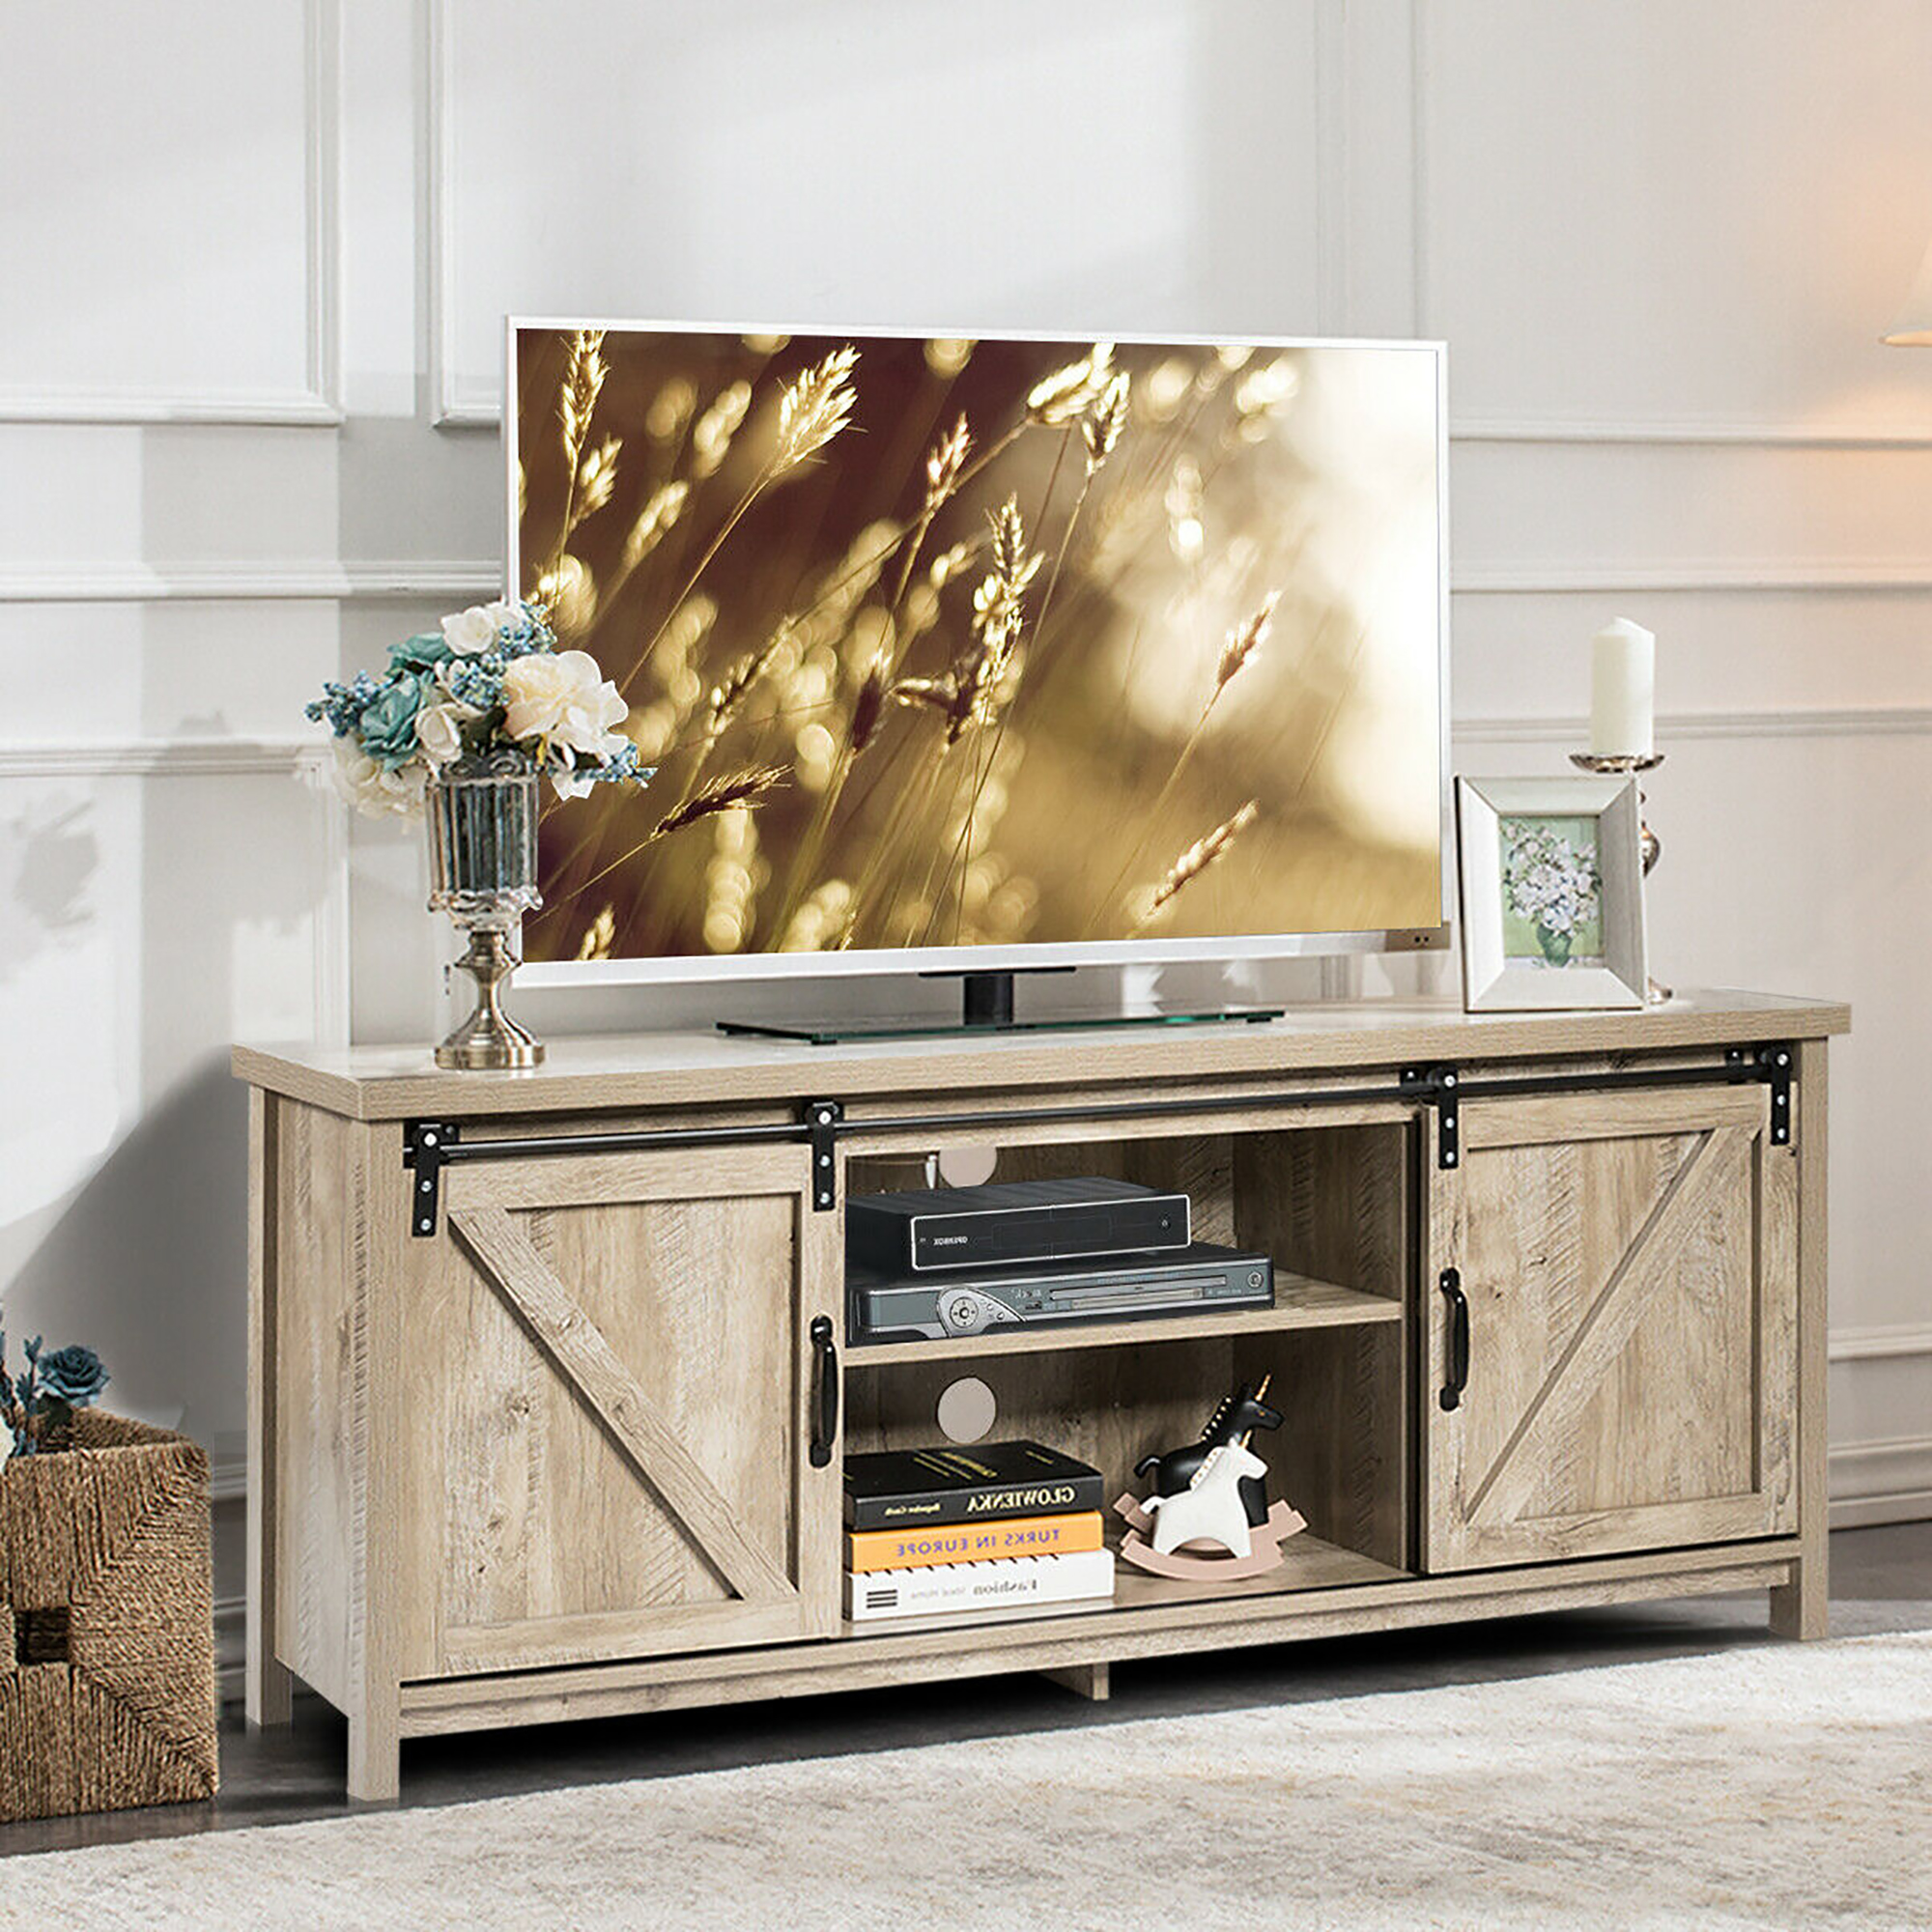 Costway TV Stand Media Center Console Cabinet Sliding Barn Door for TV's 60''